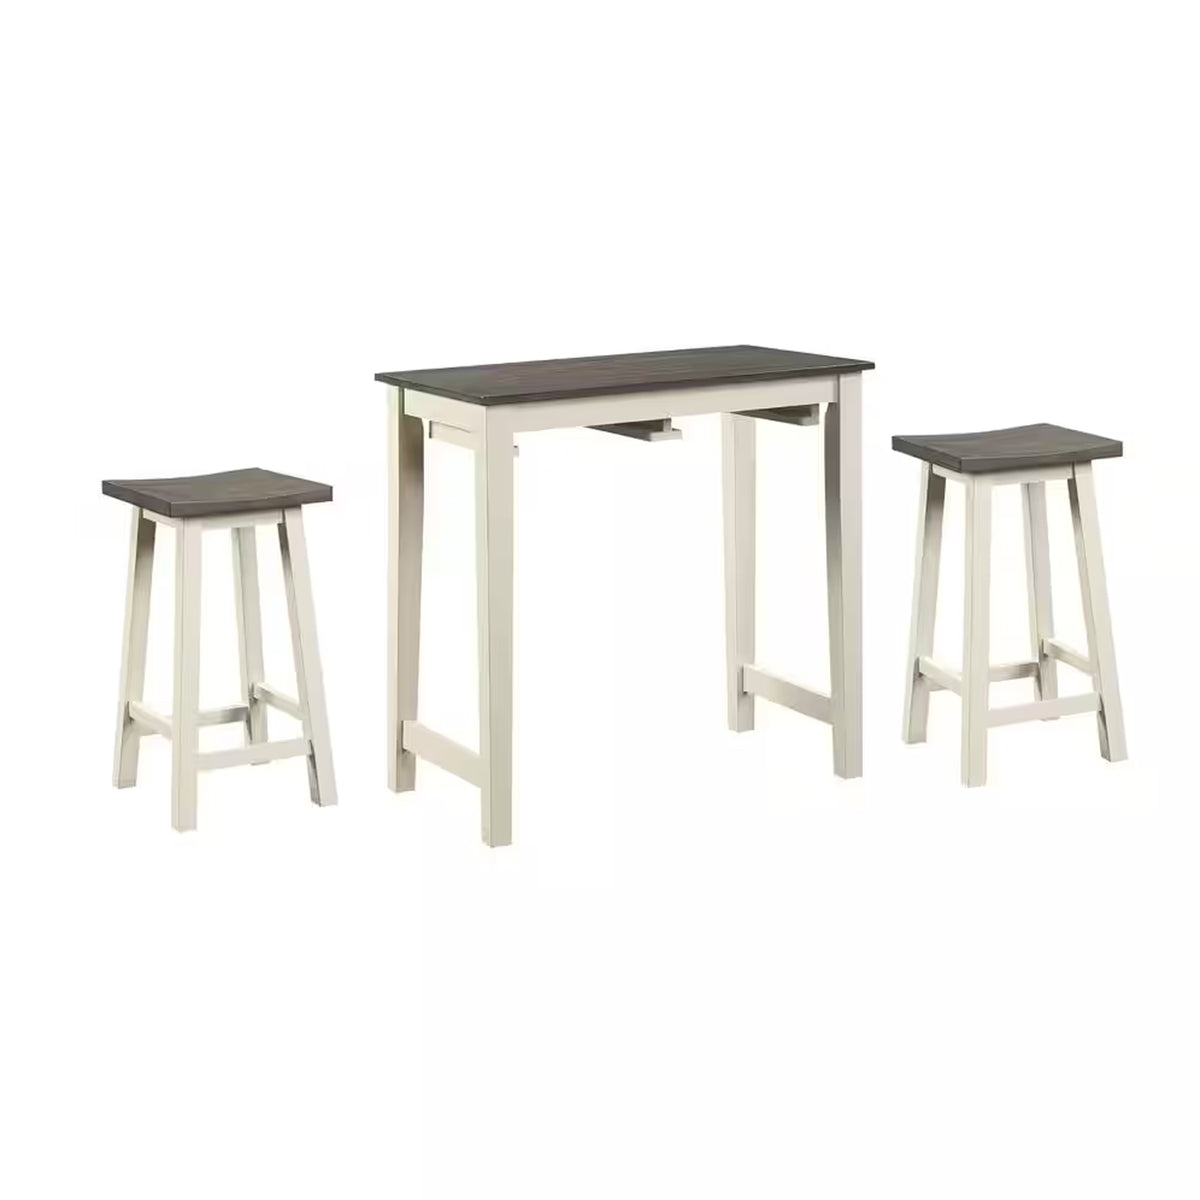 3 Piece Set Solid Wood Counter Dining Table with 2 Stools, White, Gray - BM280318